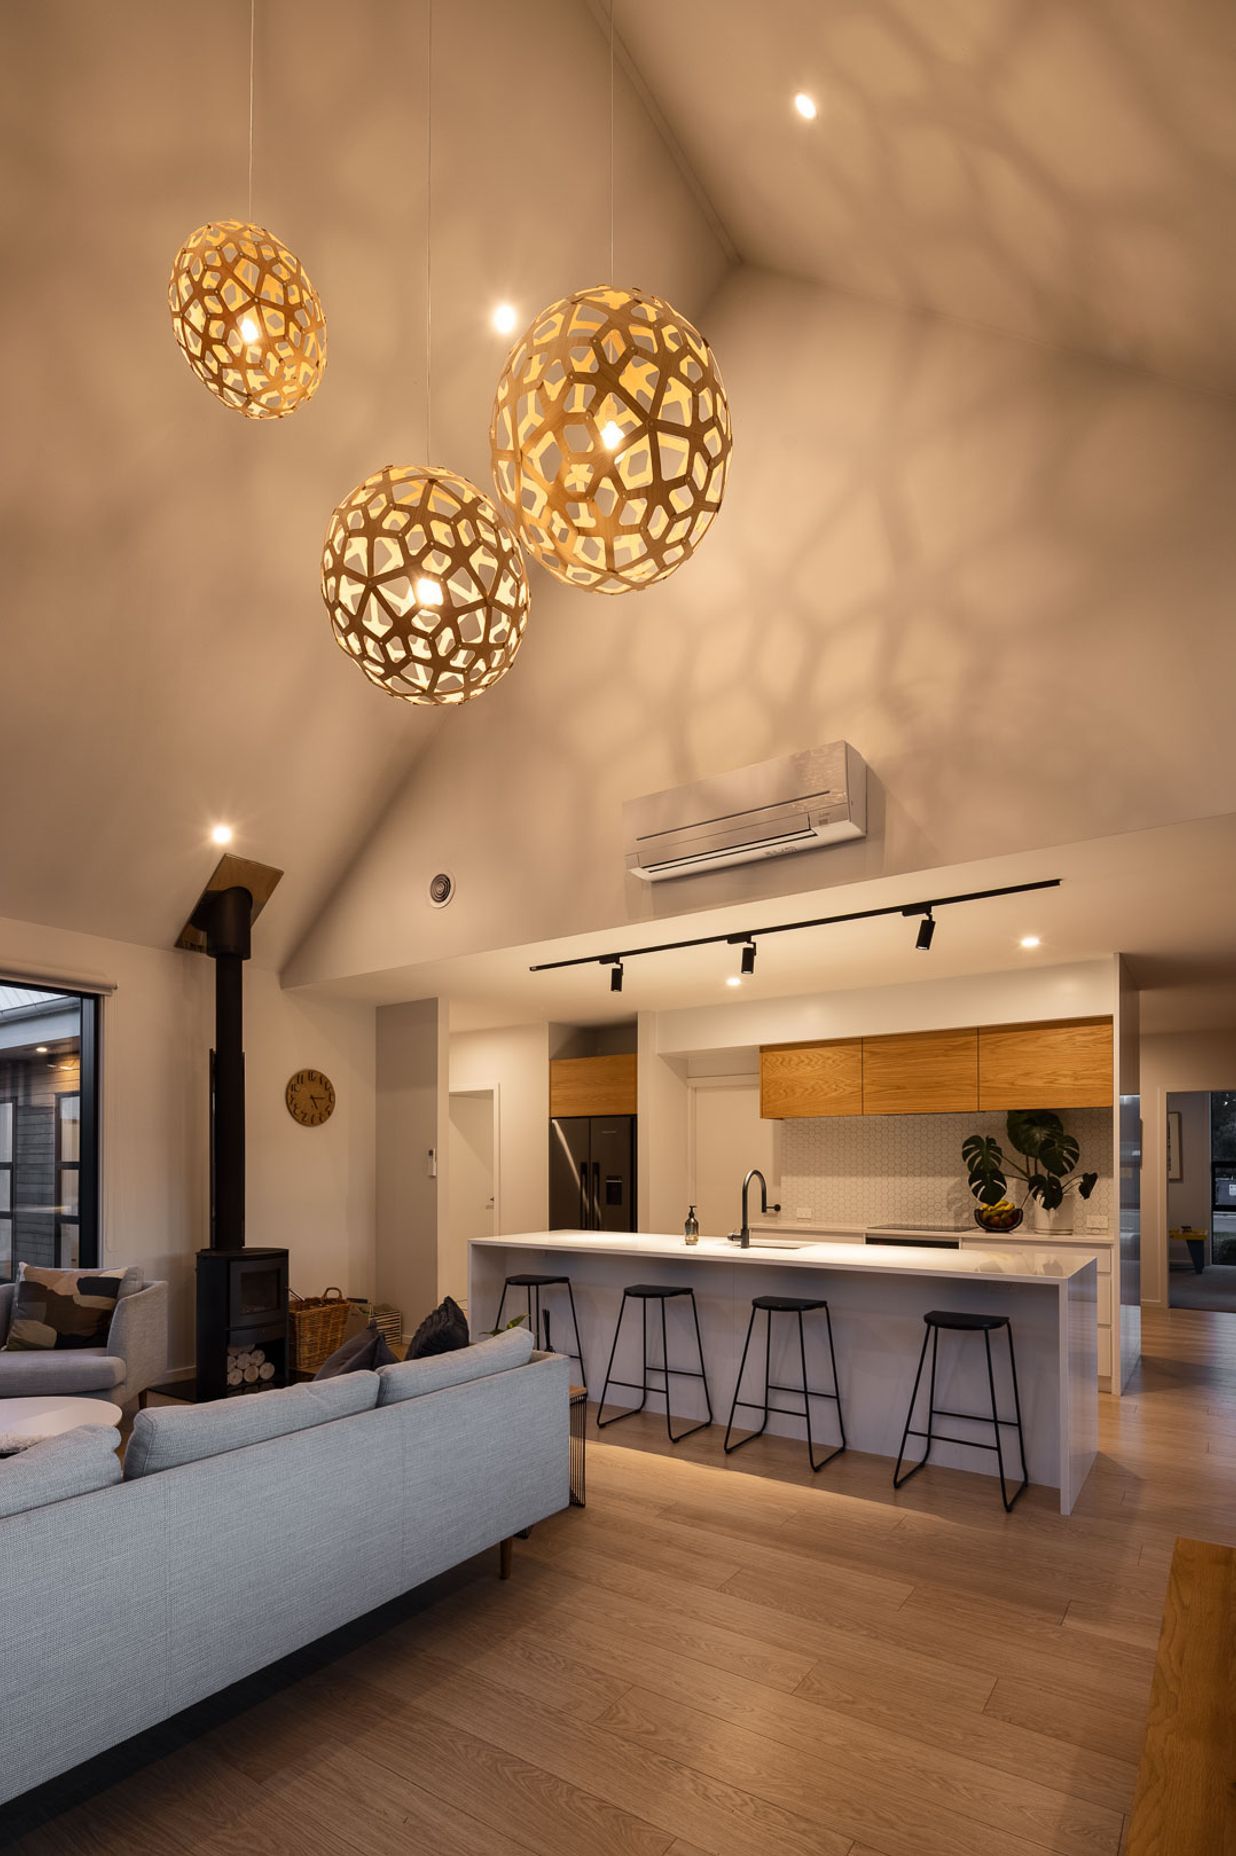 Soaring cathedral ceilings create a dramatic sense of volumetric space in the open-plan living area, which is only revealed once you step into the space.